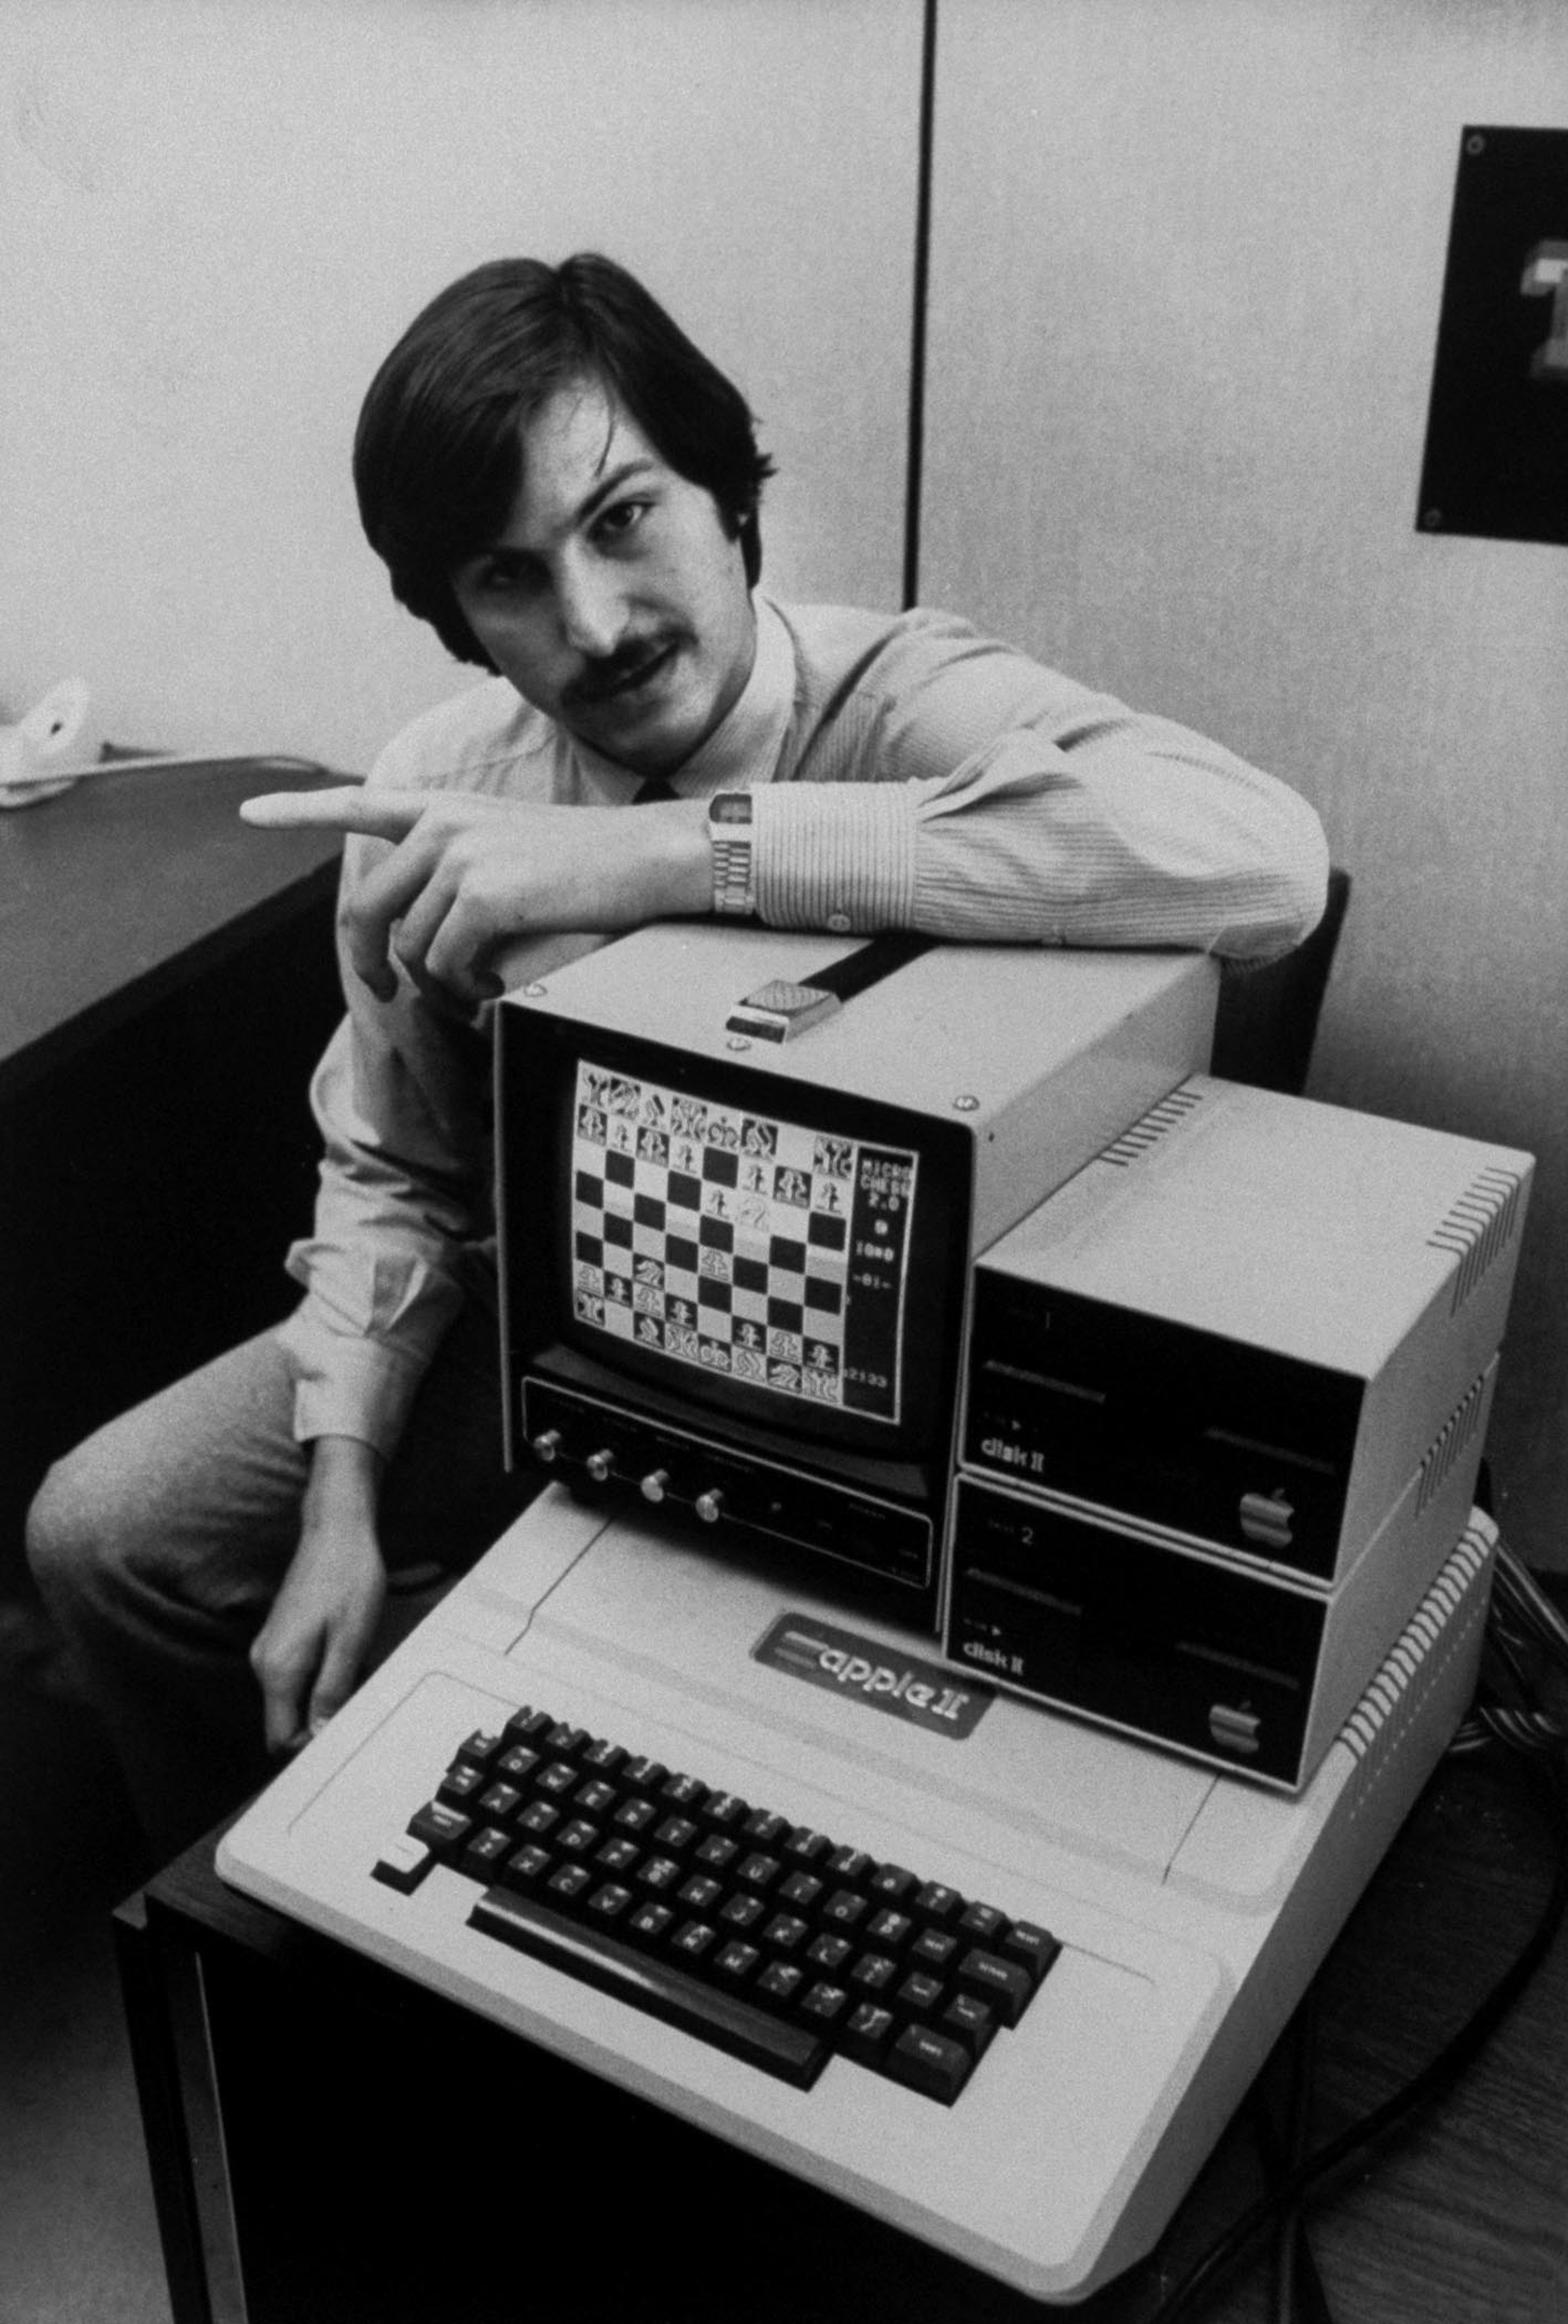 Steve Jobs with Apple II computer, with chess game displayed on screen.